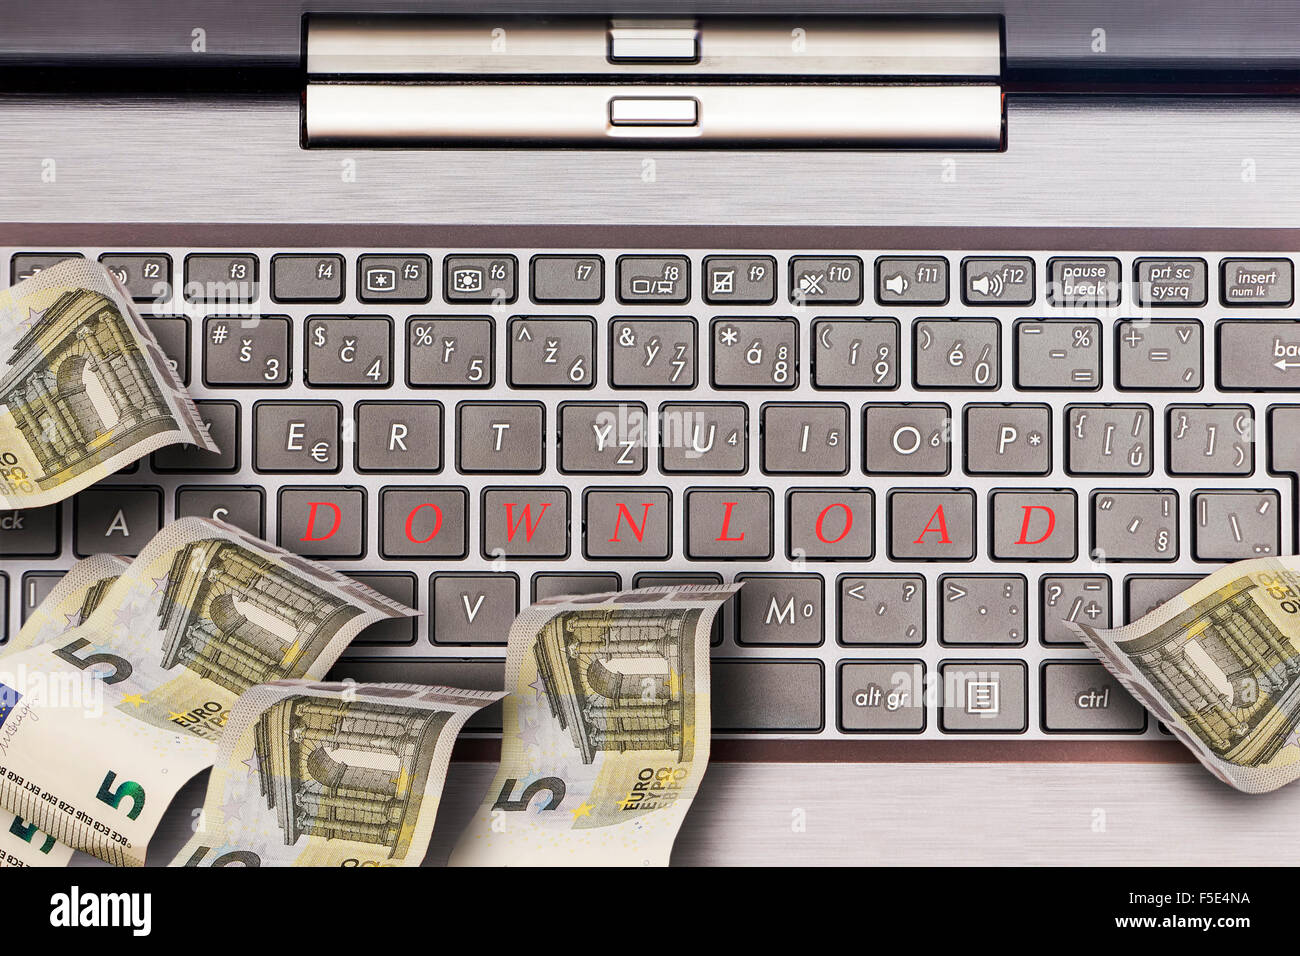 Computer keyboard with euro money and keys labeled download. Stock Photo